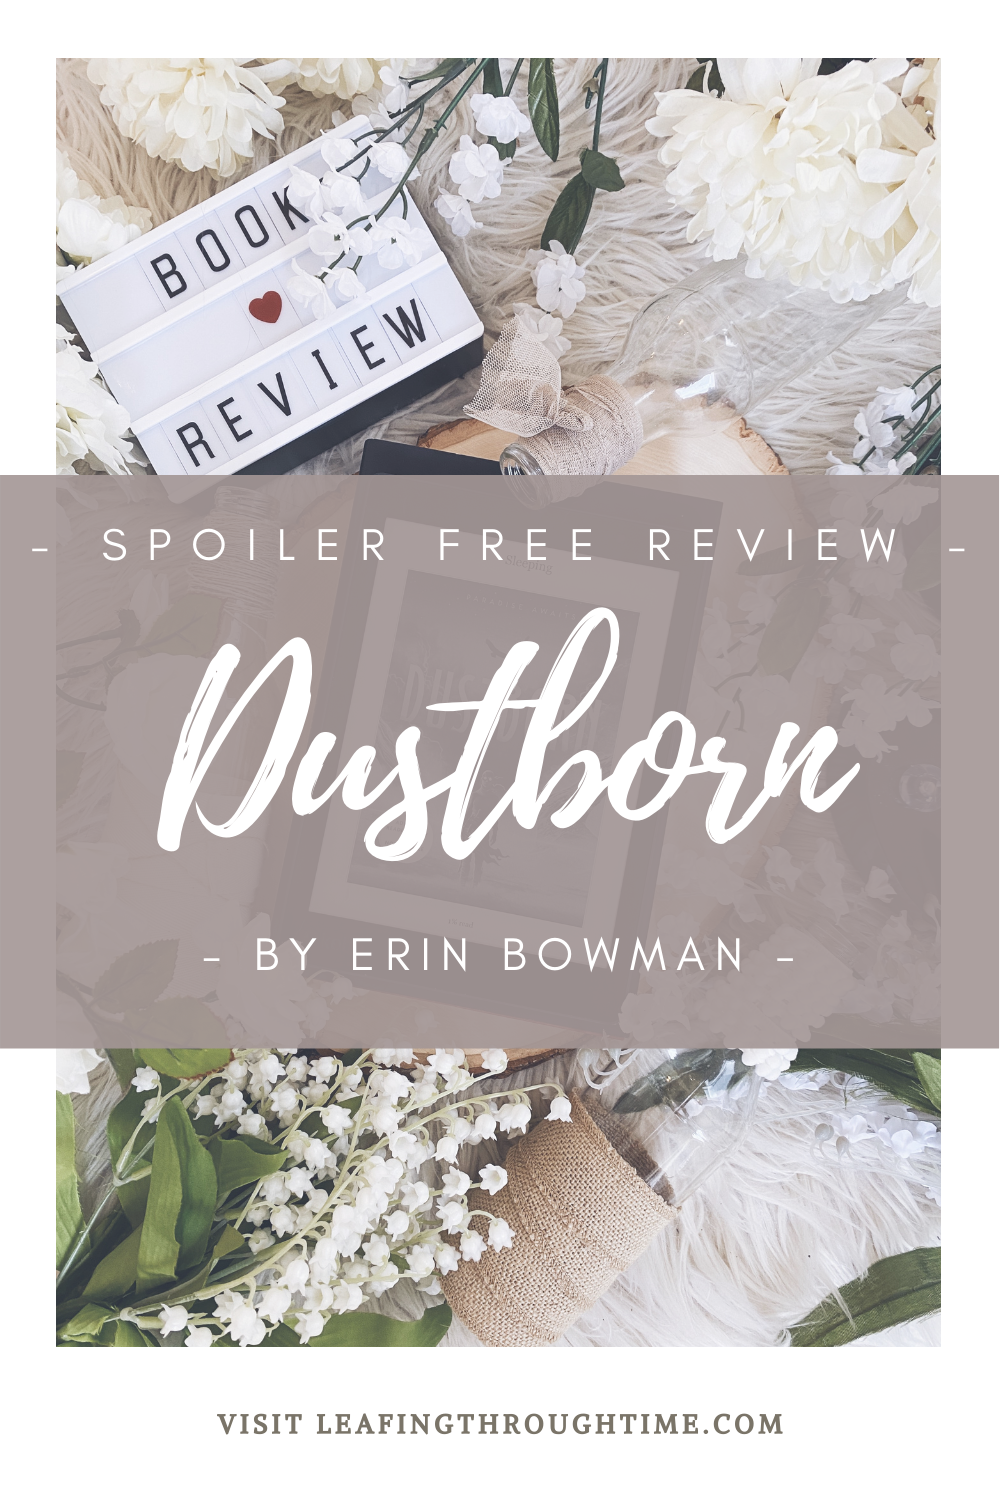 Dustborn by Erin Bowman – Spoiler Free Review